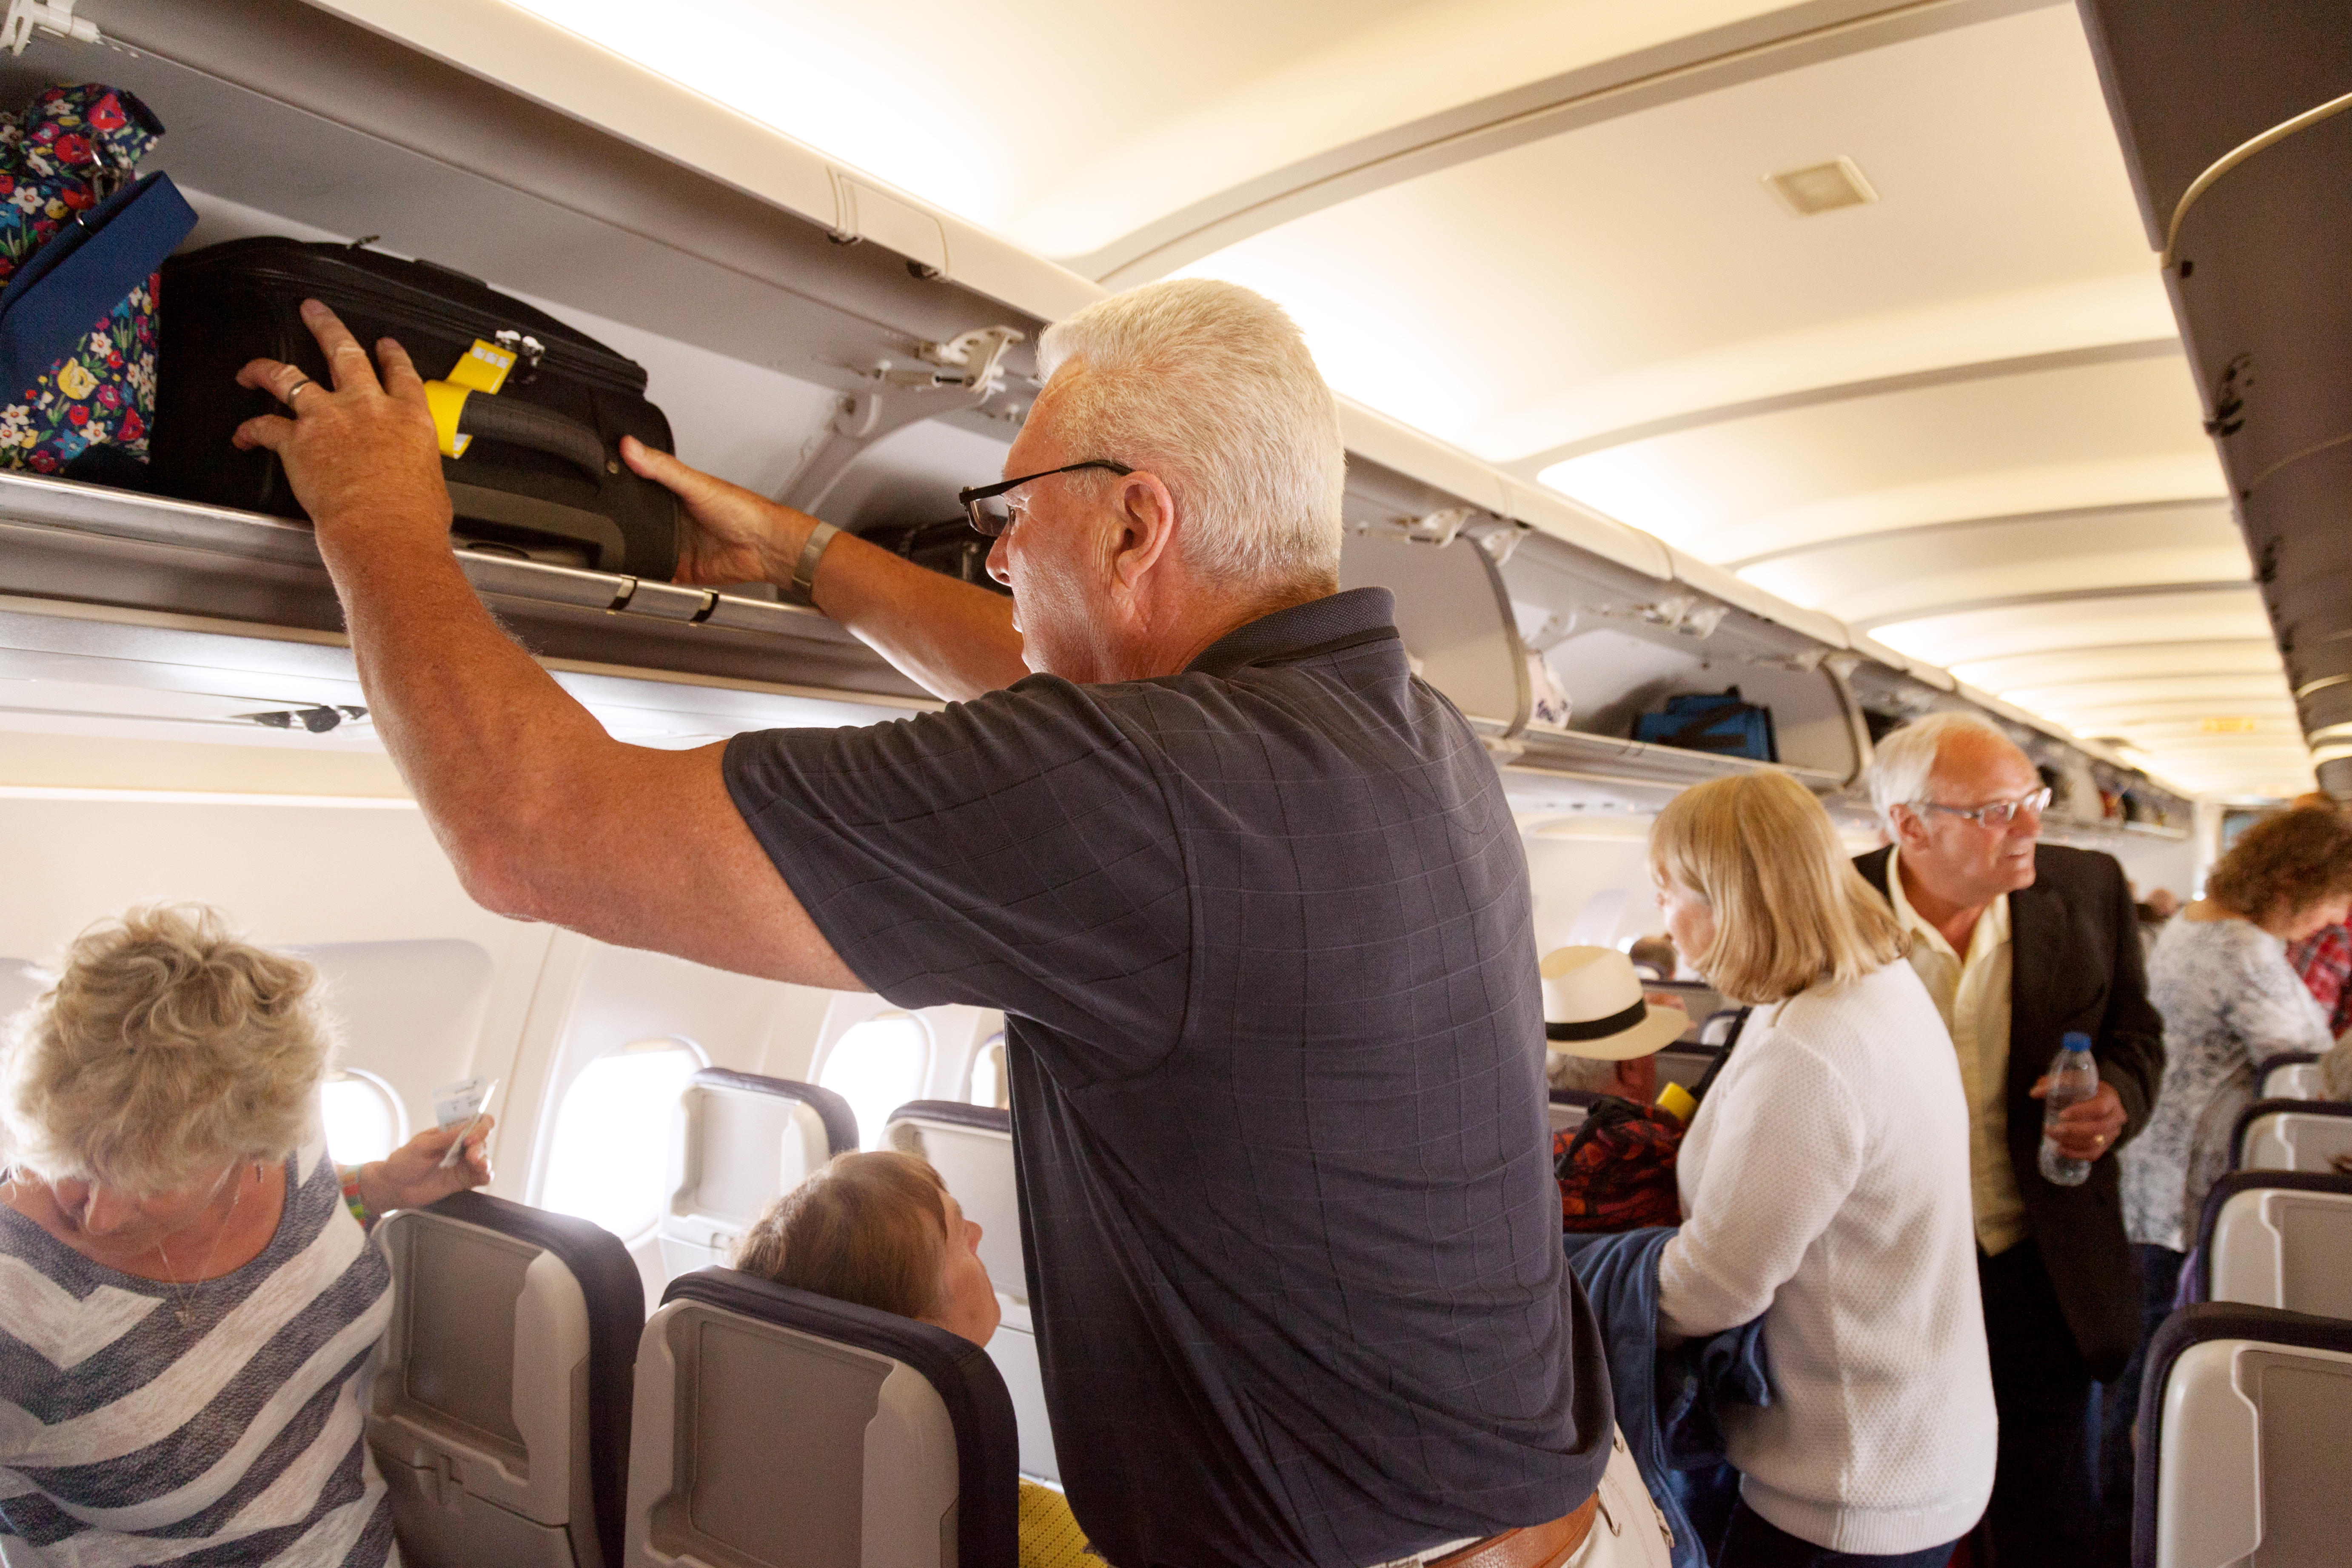 Some experts are calling for overhead bins to be scrapped completely